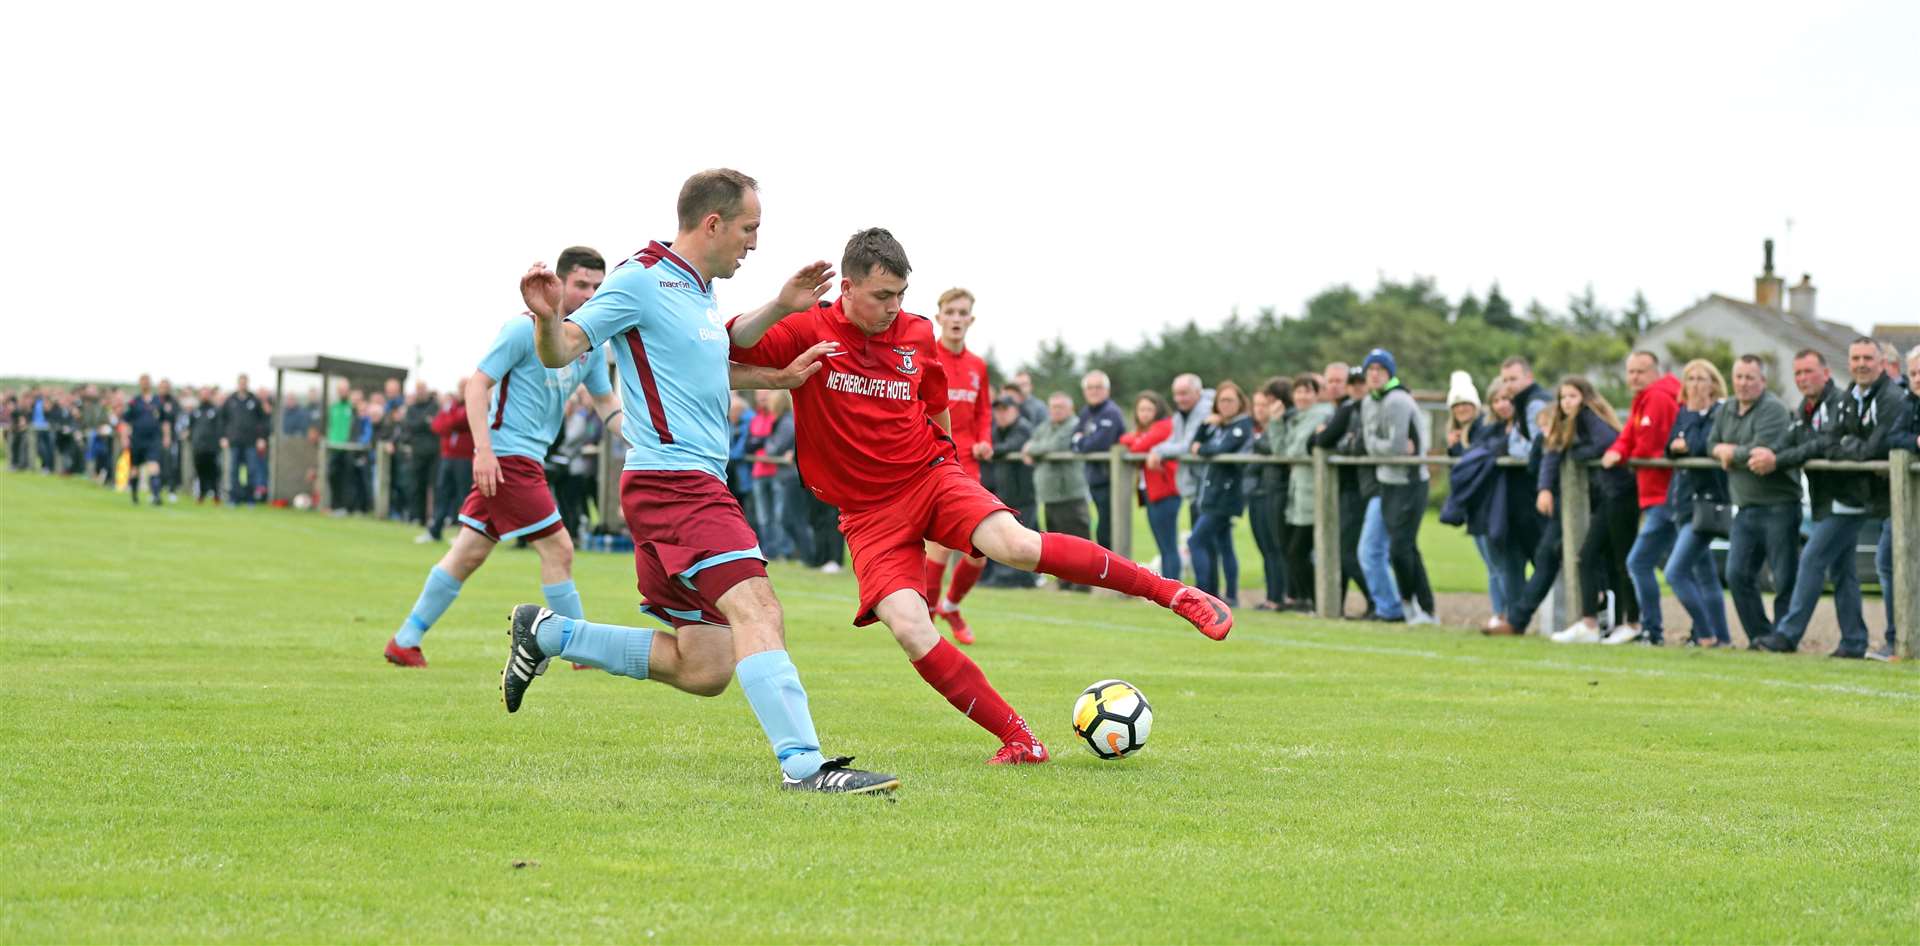 Action from a Pentland United v Wick Groats match in 2019. United's Michael Gray says summer football is 'a very social part of the Caithness community'. Picture: James Gunn